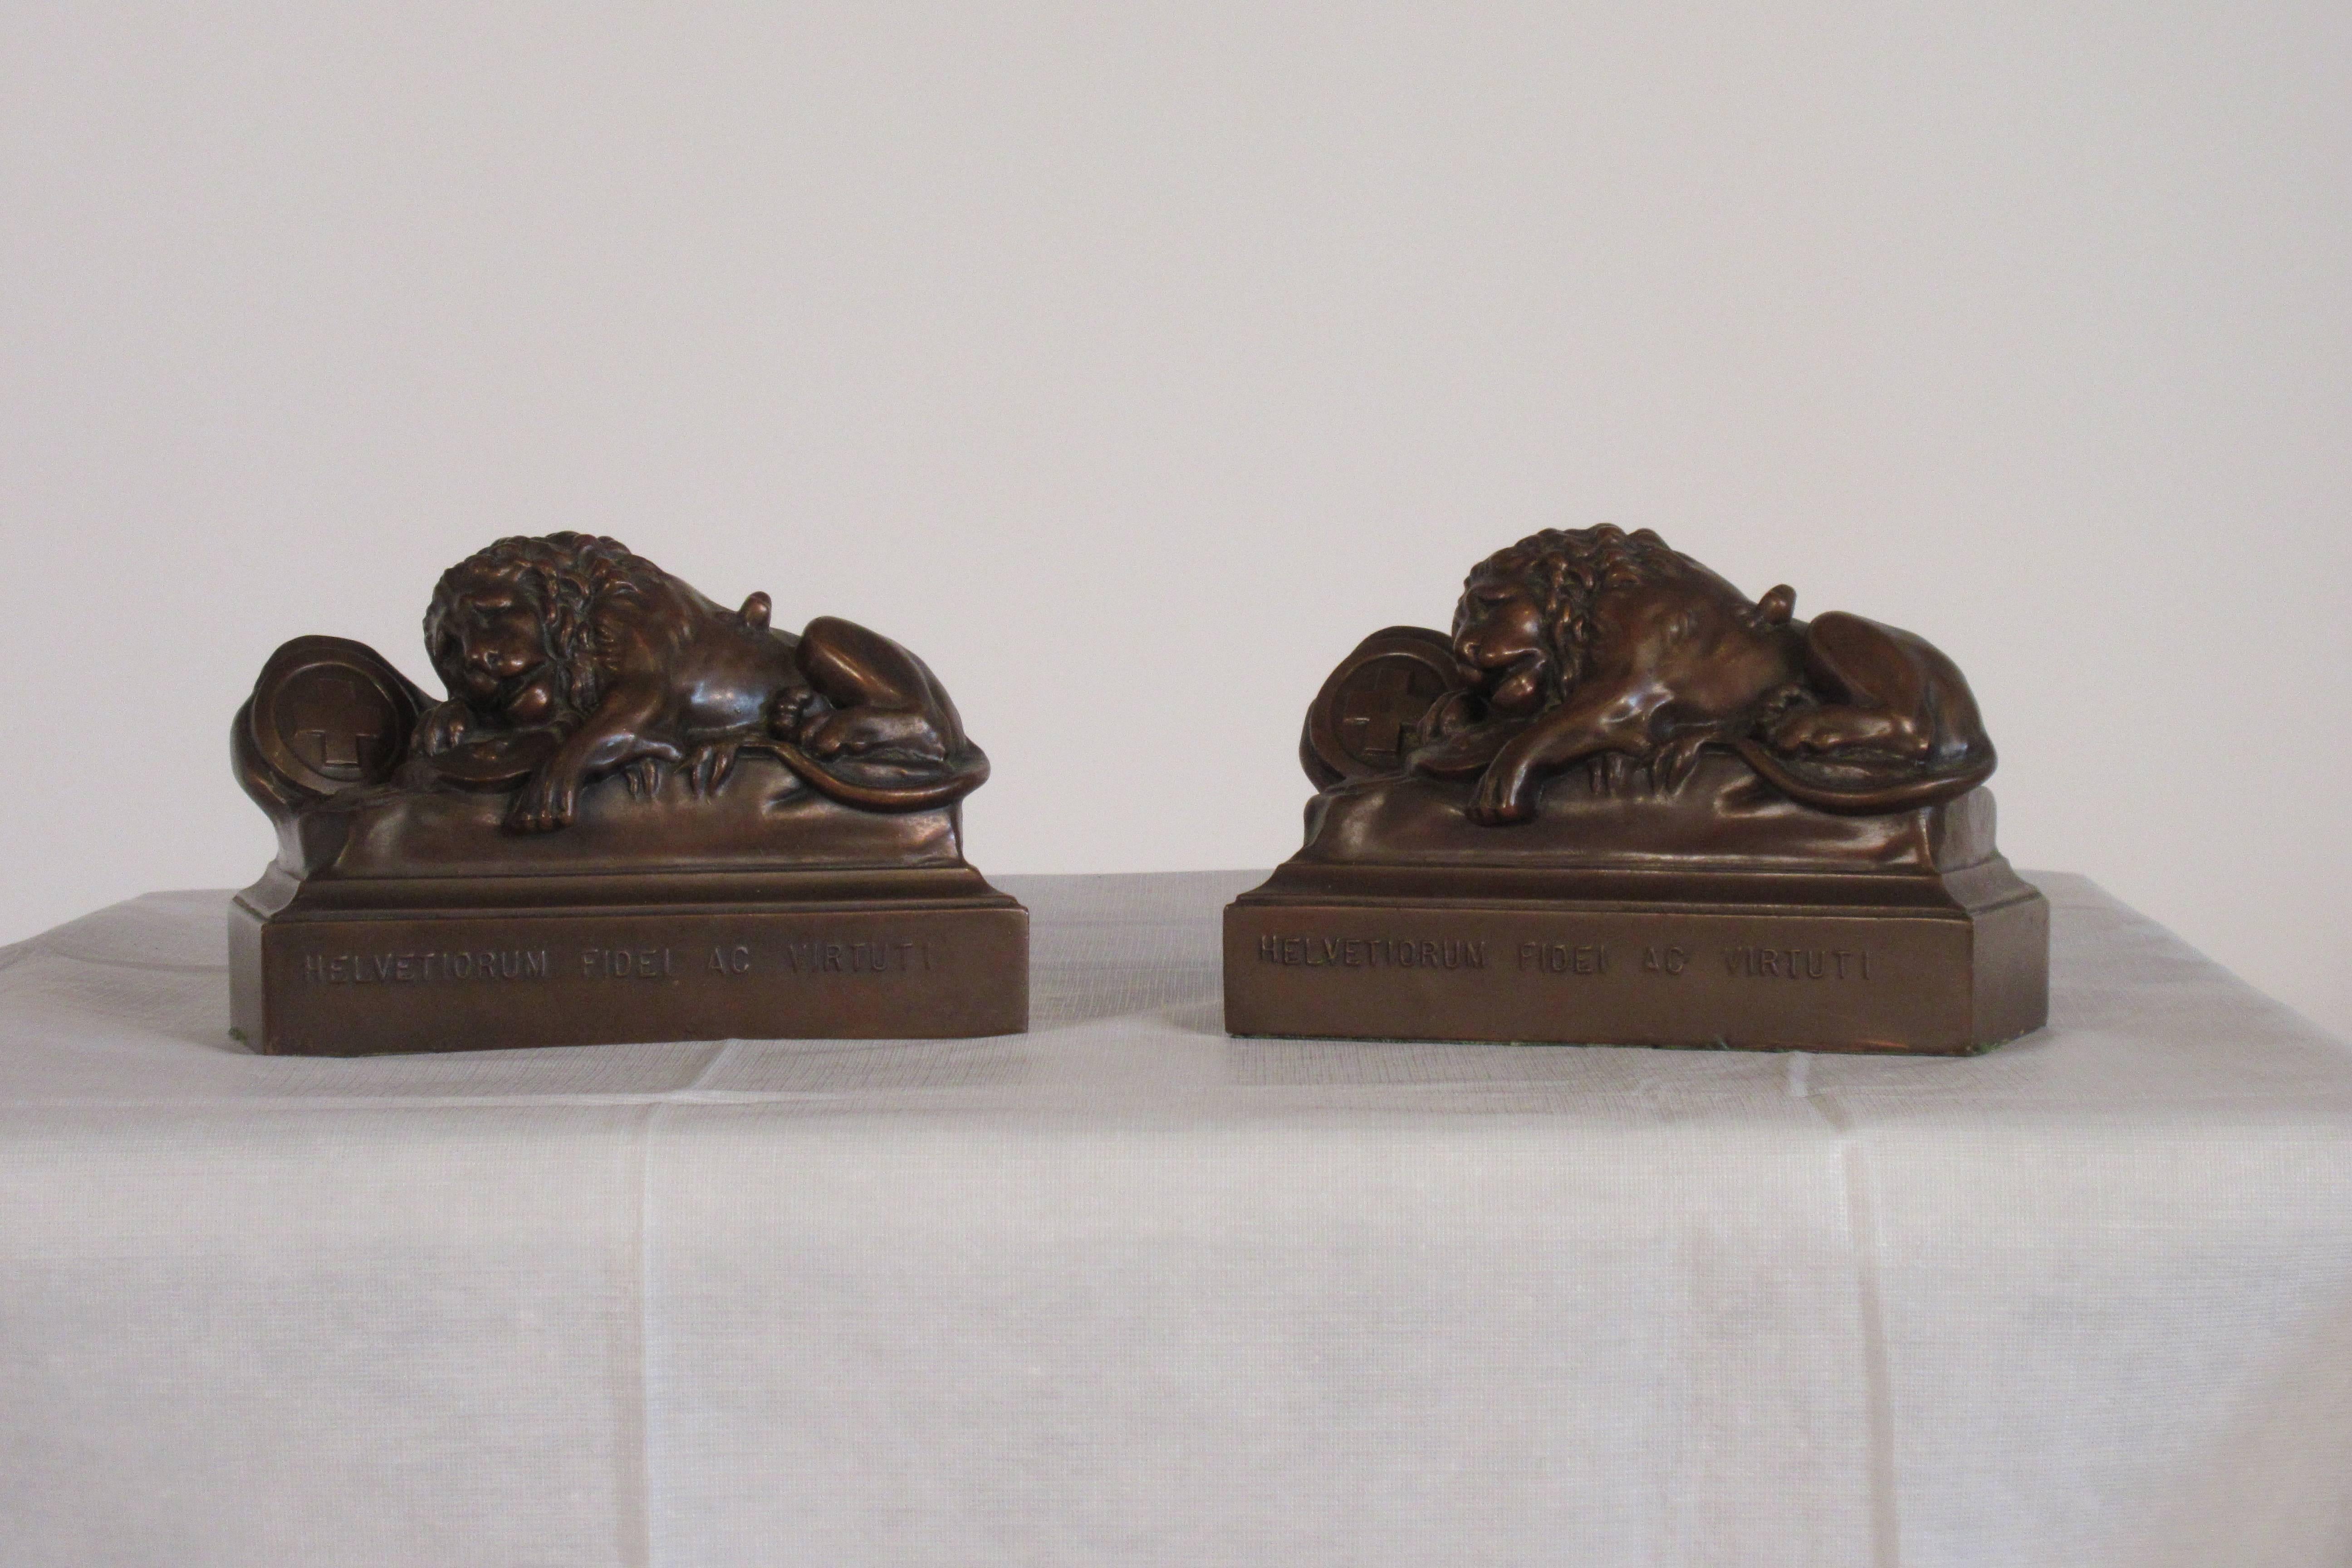 1930s, bronze coated Lion Of Lucerne bookends.